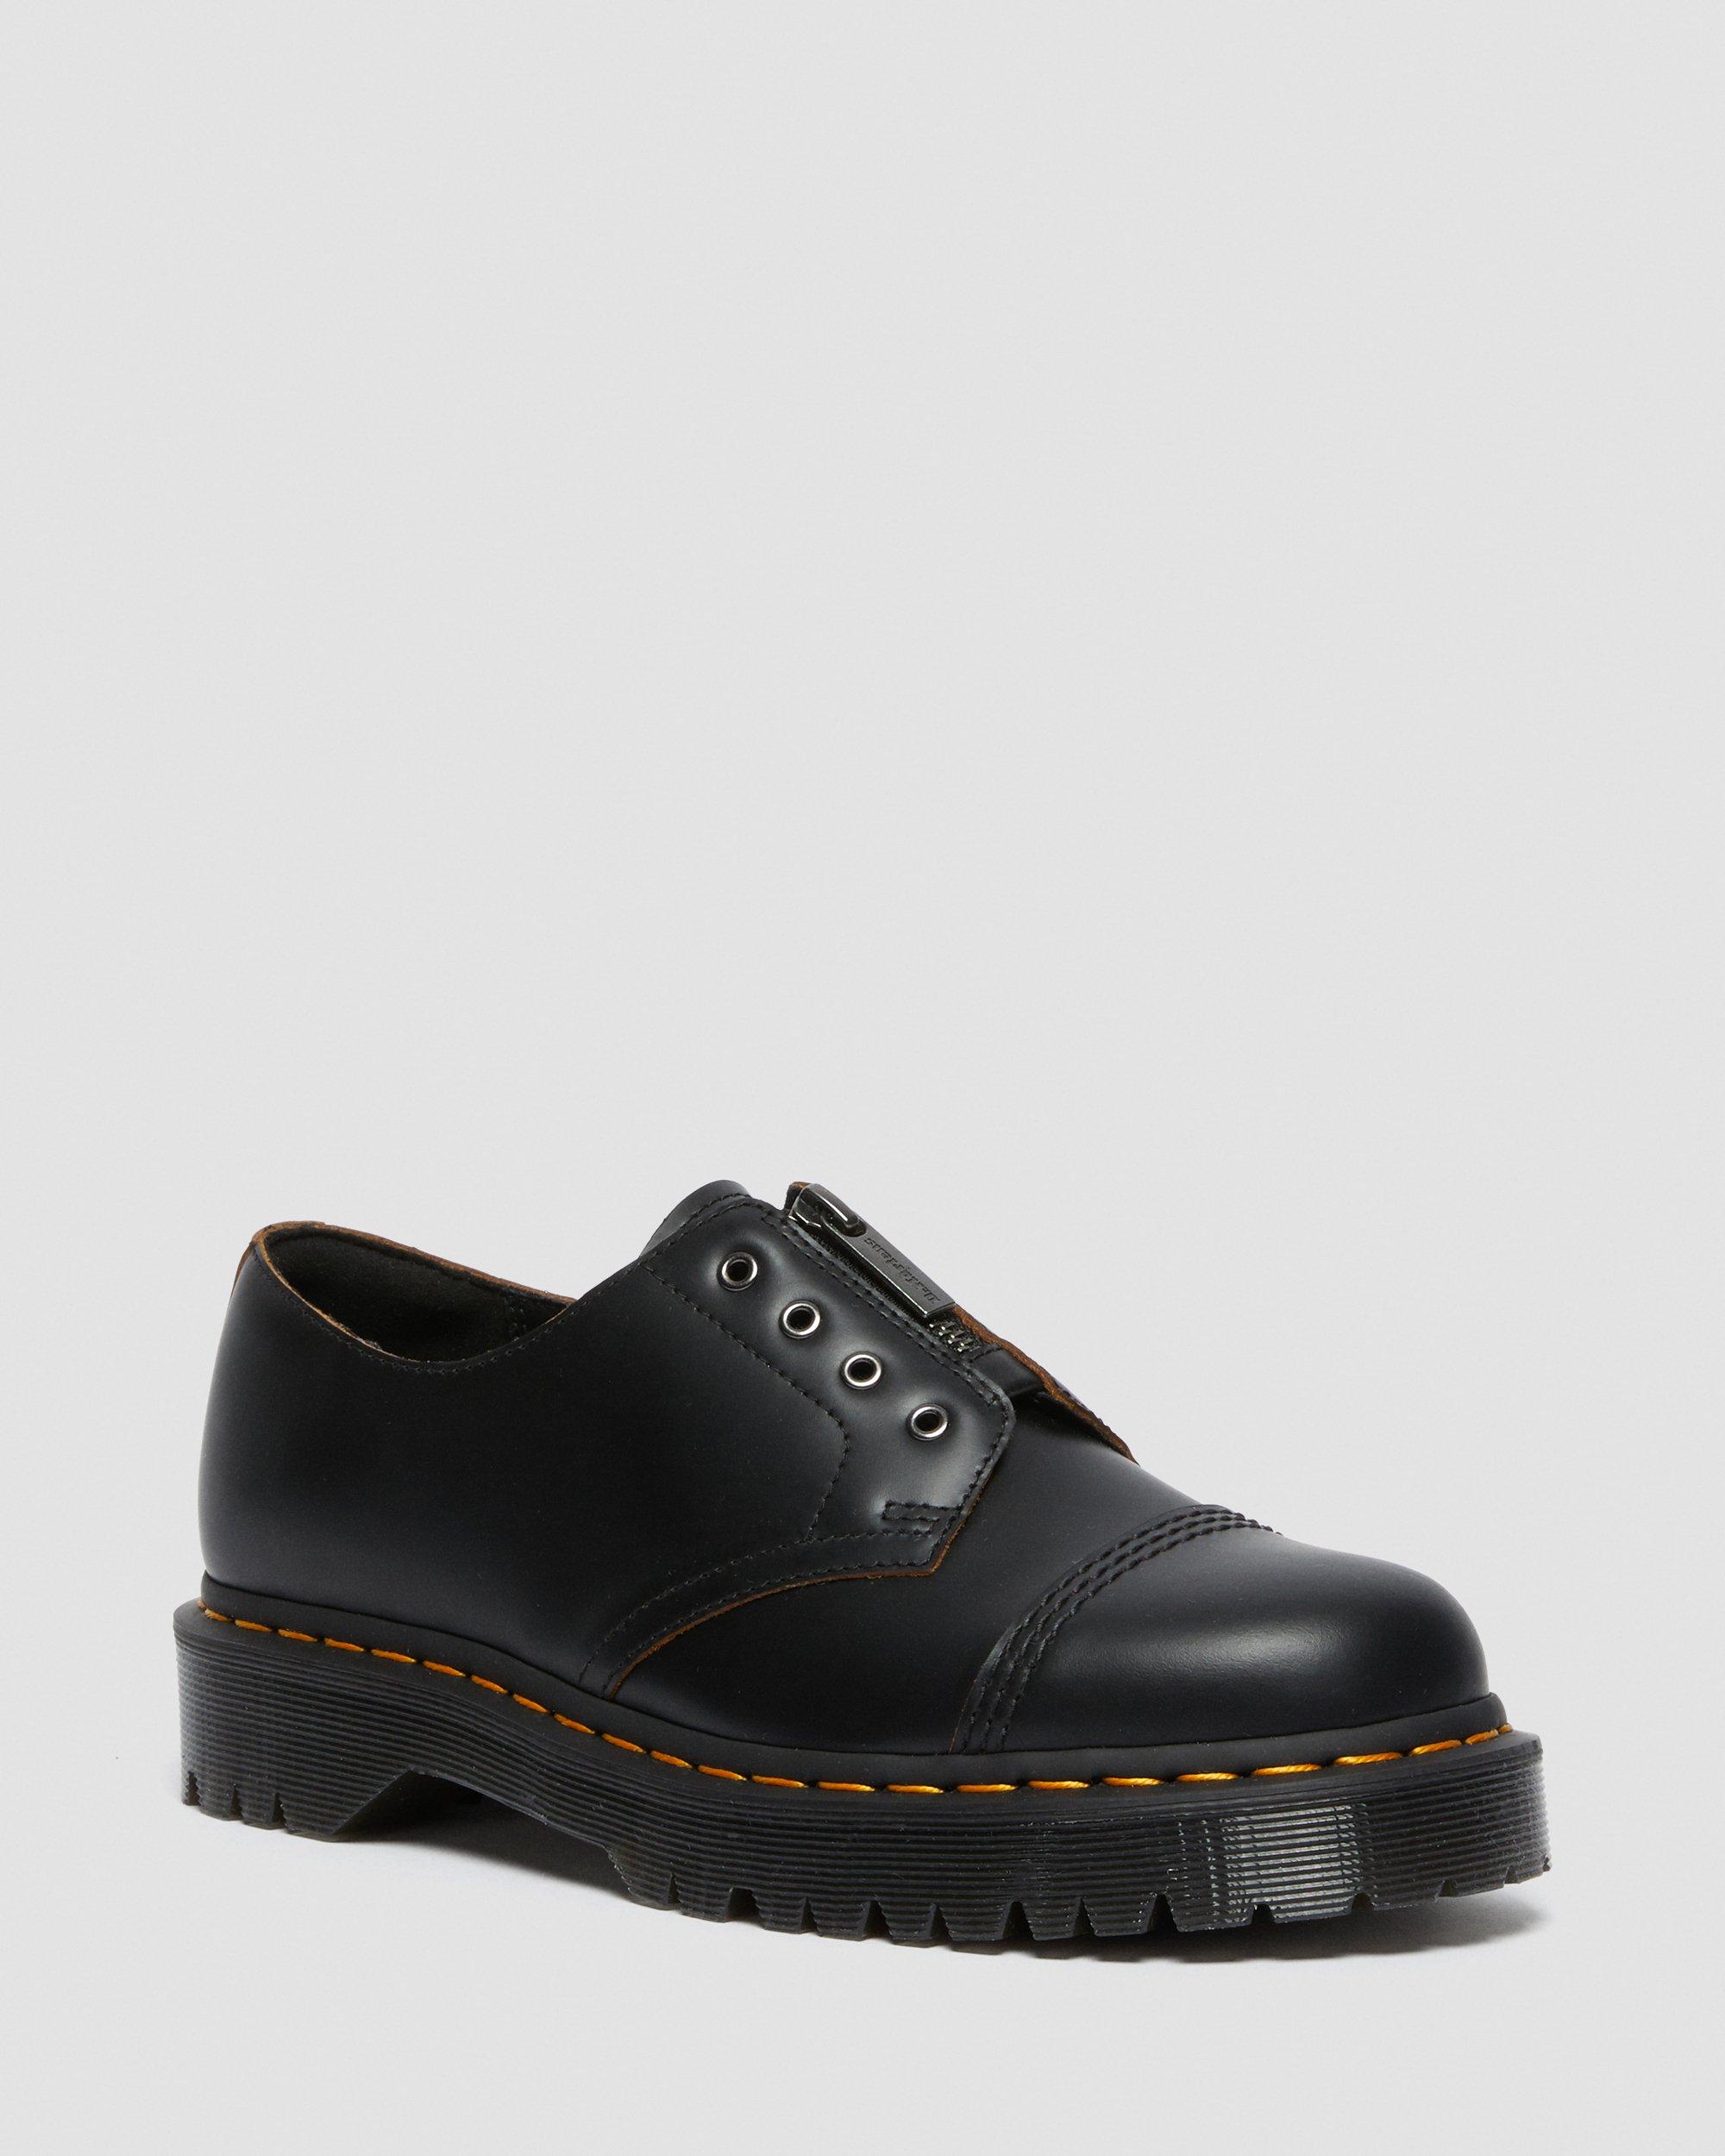 Smiths Laceless Bex Leather Shoes in Black | Dr. Martens